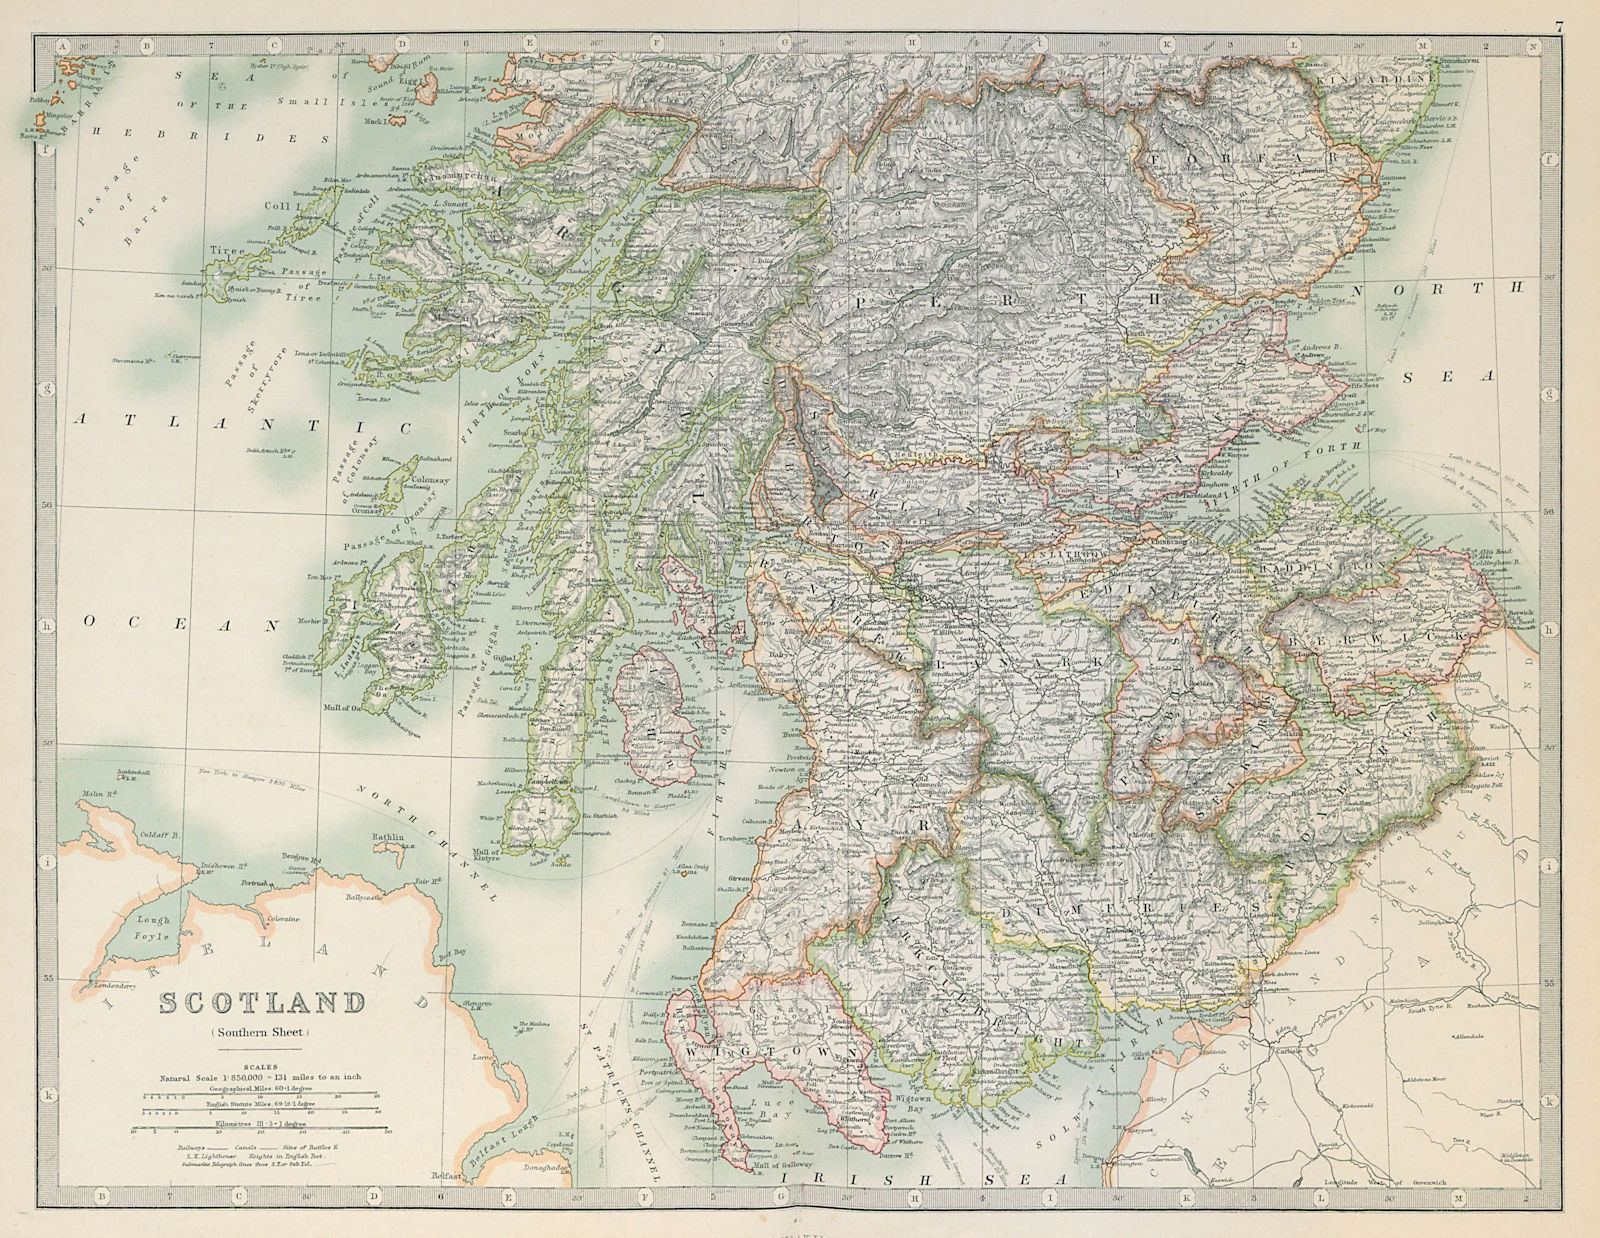 Associate Product SOUTHERN SCOTLAND showing battlefields and dates. JOHNSTON 1915 old map